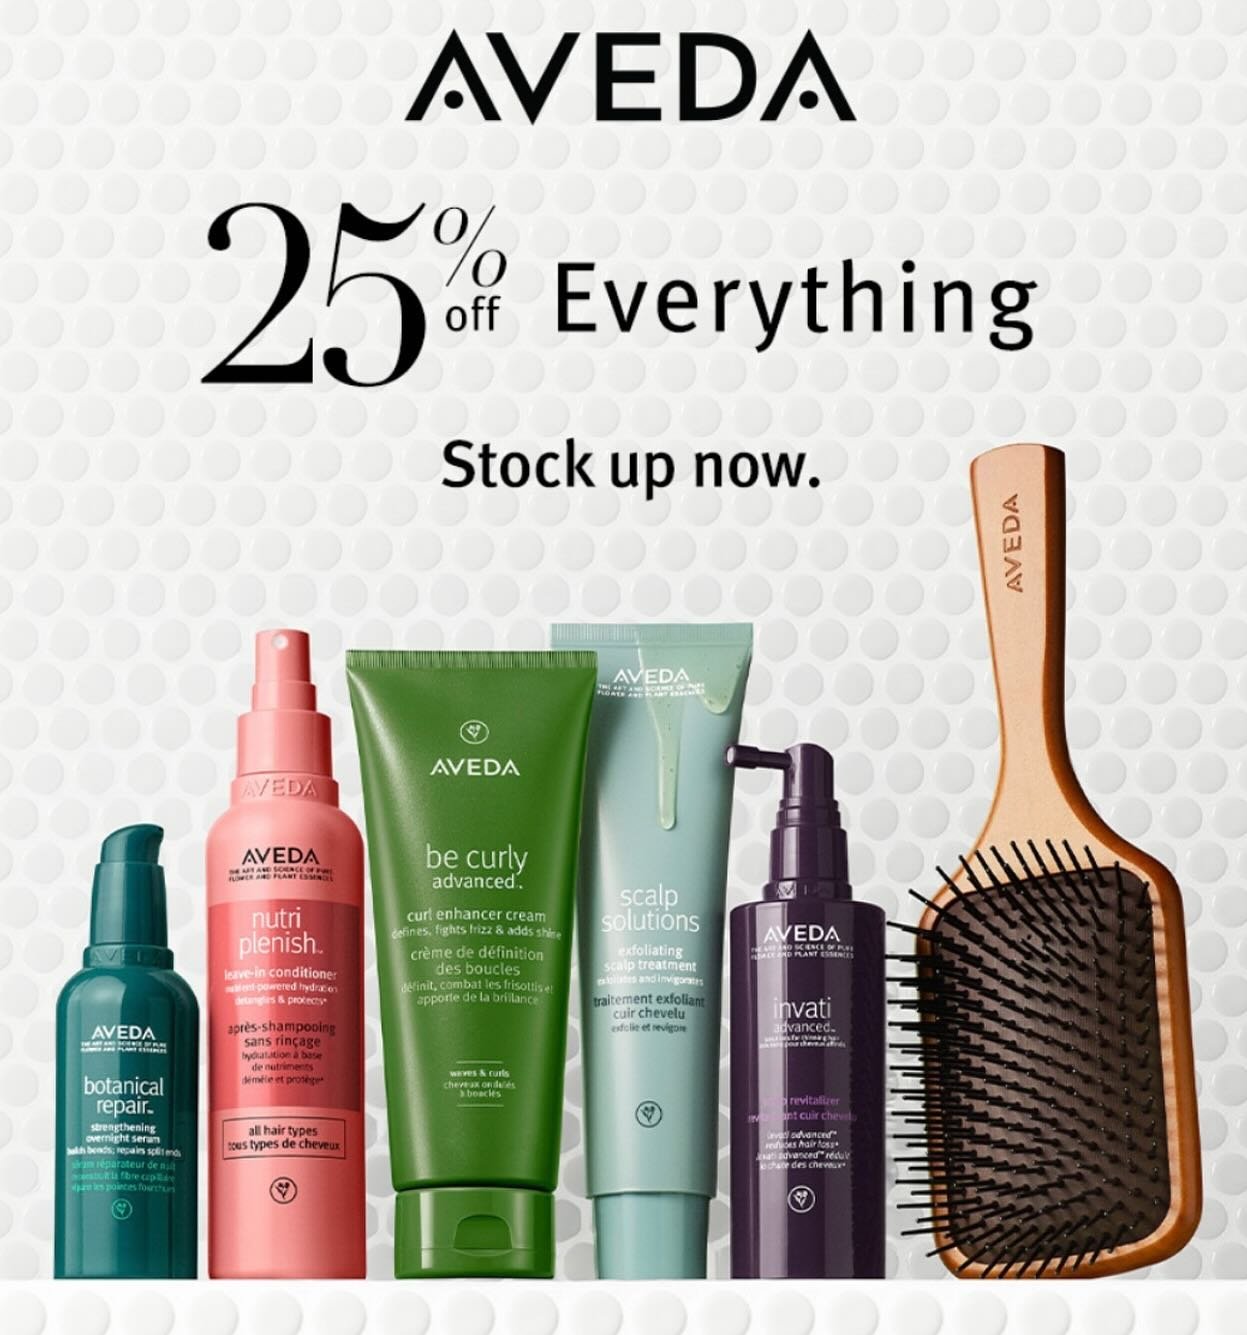 Now through May 20th save big on all of your Aveda favorites!